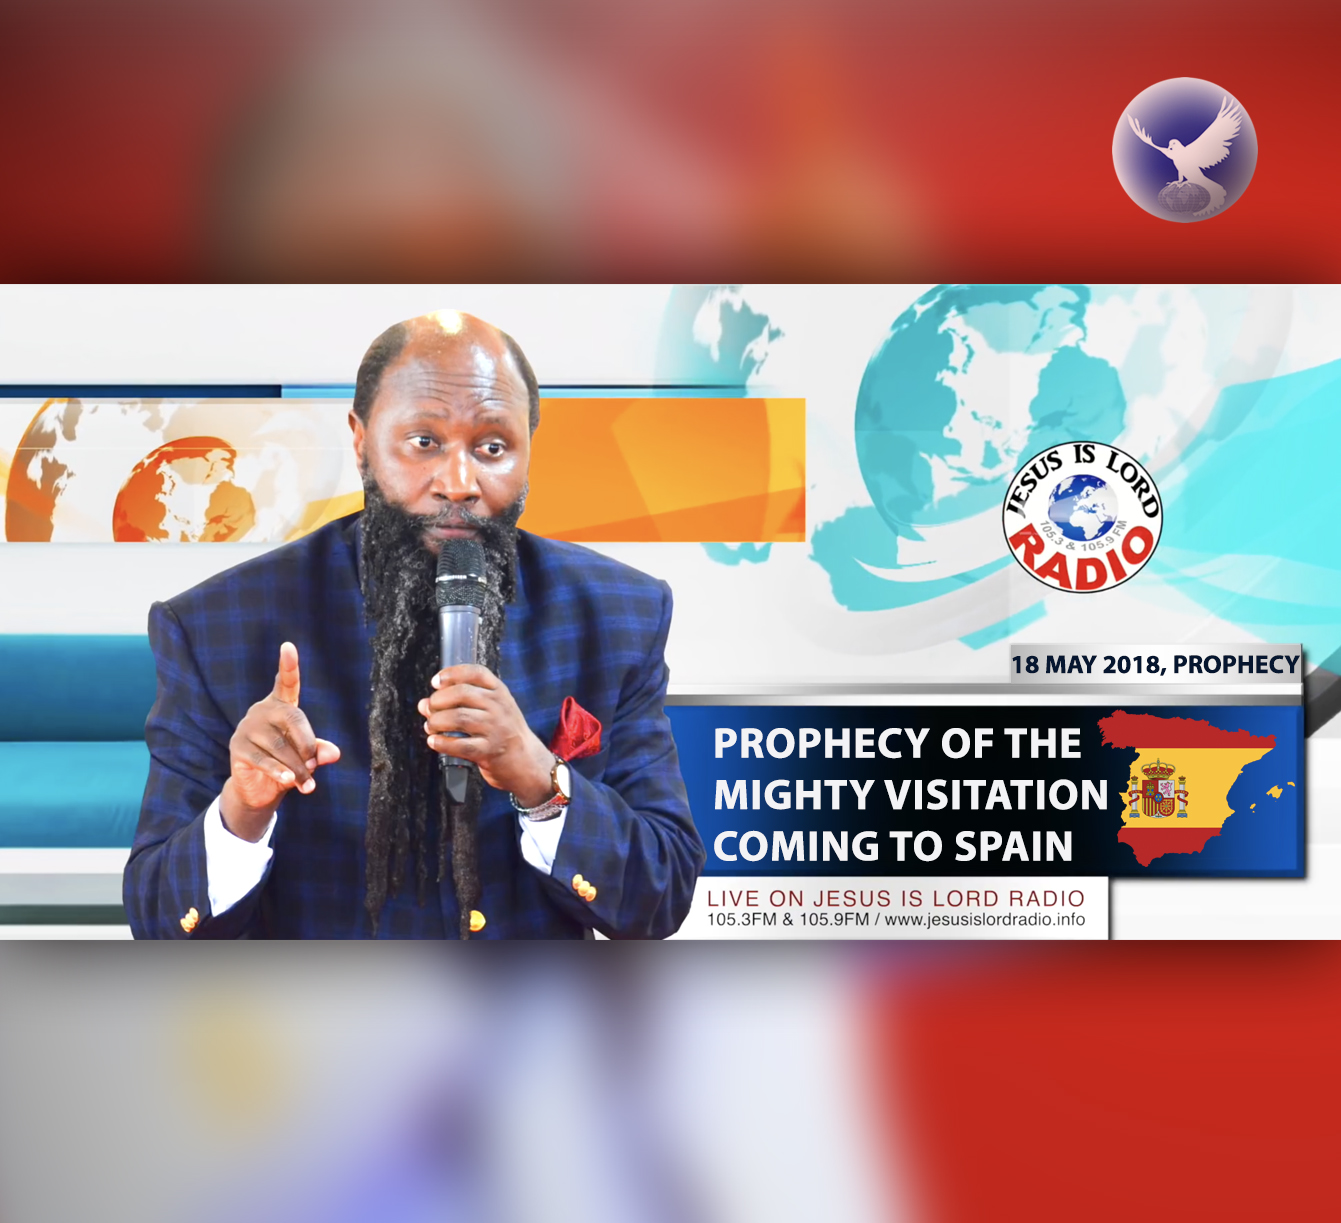 EPISODE 201 - PROPHECY OF THE MIGHTY VISITATION COMING TO SPAIN (18MAY2018) - PROPHET DR. OWUOR